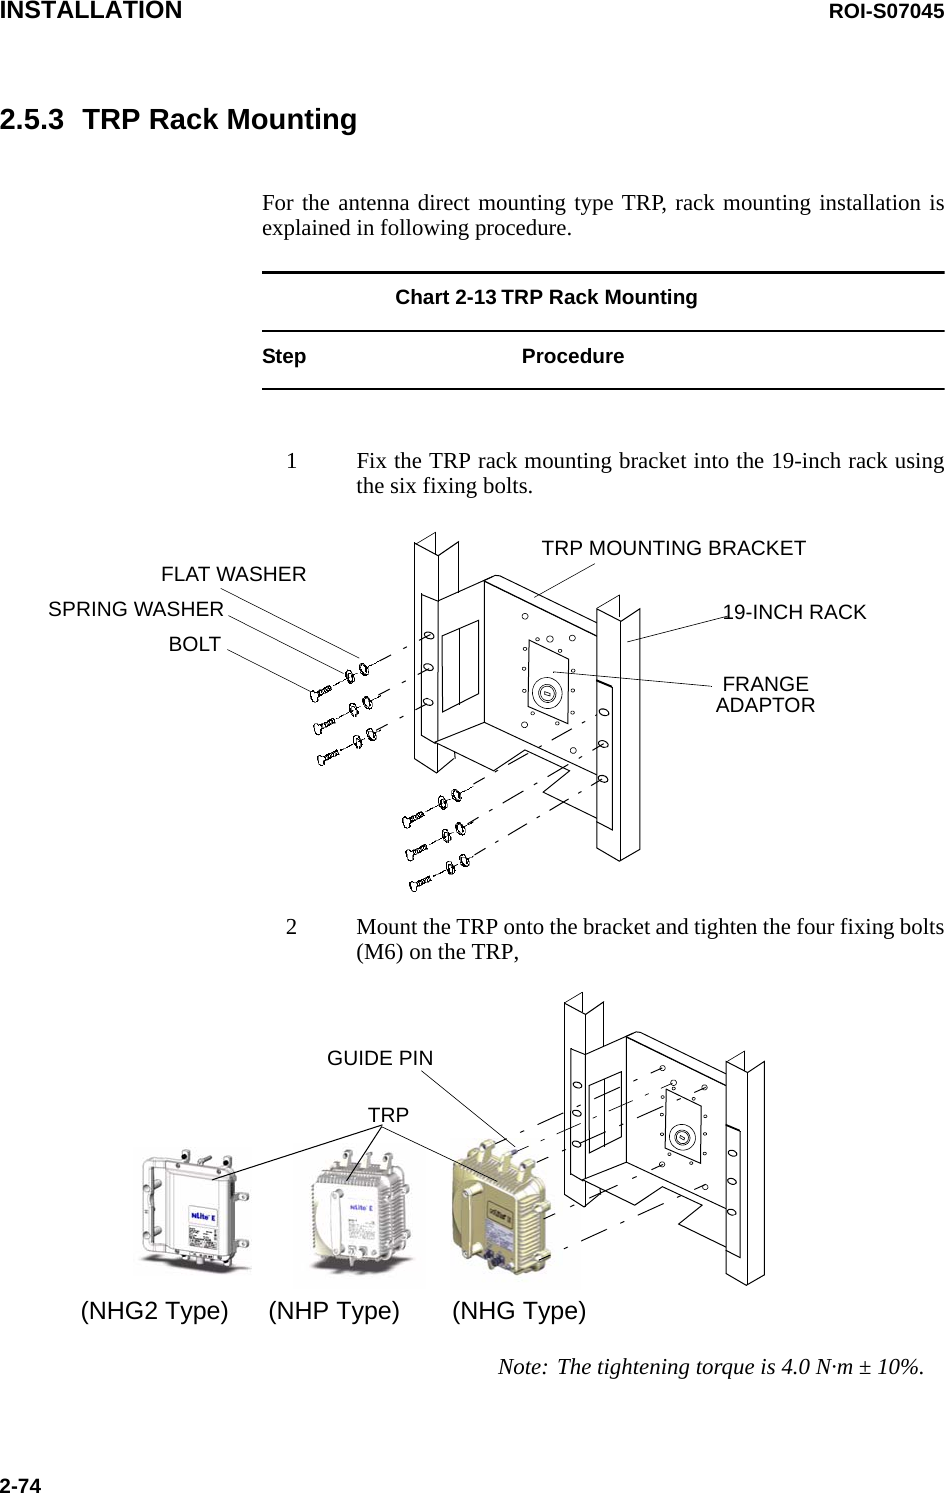 INSTALLATION ROI-S070452-742.5.3 TRP Rack MountingFor the antenna direct mounting type TRP, rack mounting installation isexplained in following procedure.Chart 2-13 TRP Rack MountingStep Procedure1 Fix the TRP rack mounting bracket into the 19-inch rack usingthe six fixing bolts.2 Mount the TRP onto the bracket and tighten the four fixing bolts(M6) on the TRP,BOLTSPRING WASHERFLAT WASHER19-INCH RACKTRP MOUNTING BRACKETFRANGE ADAPTORNote: The tightening torque is 4.0 N·m ± 10%.TRPGUIDE PIN(NHP Type) (NHG Type)(NHG2 Type)